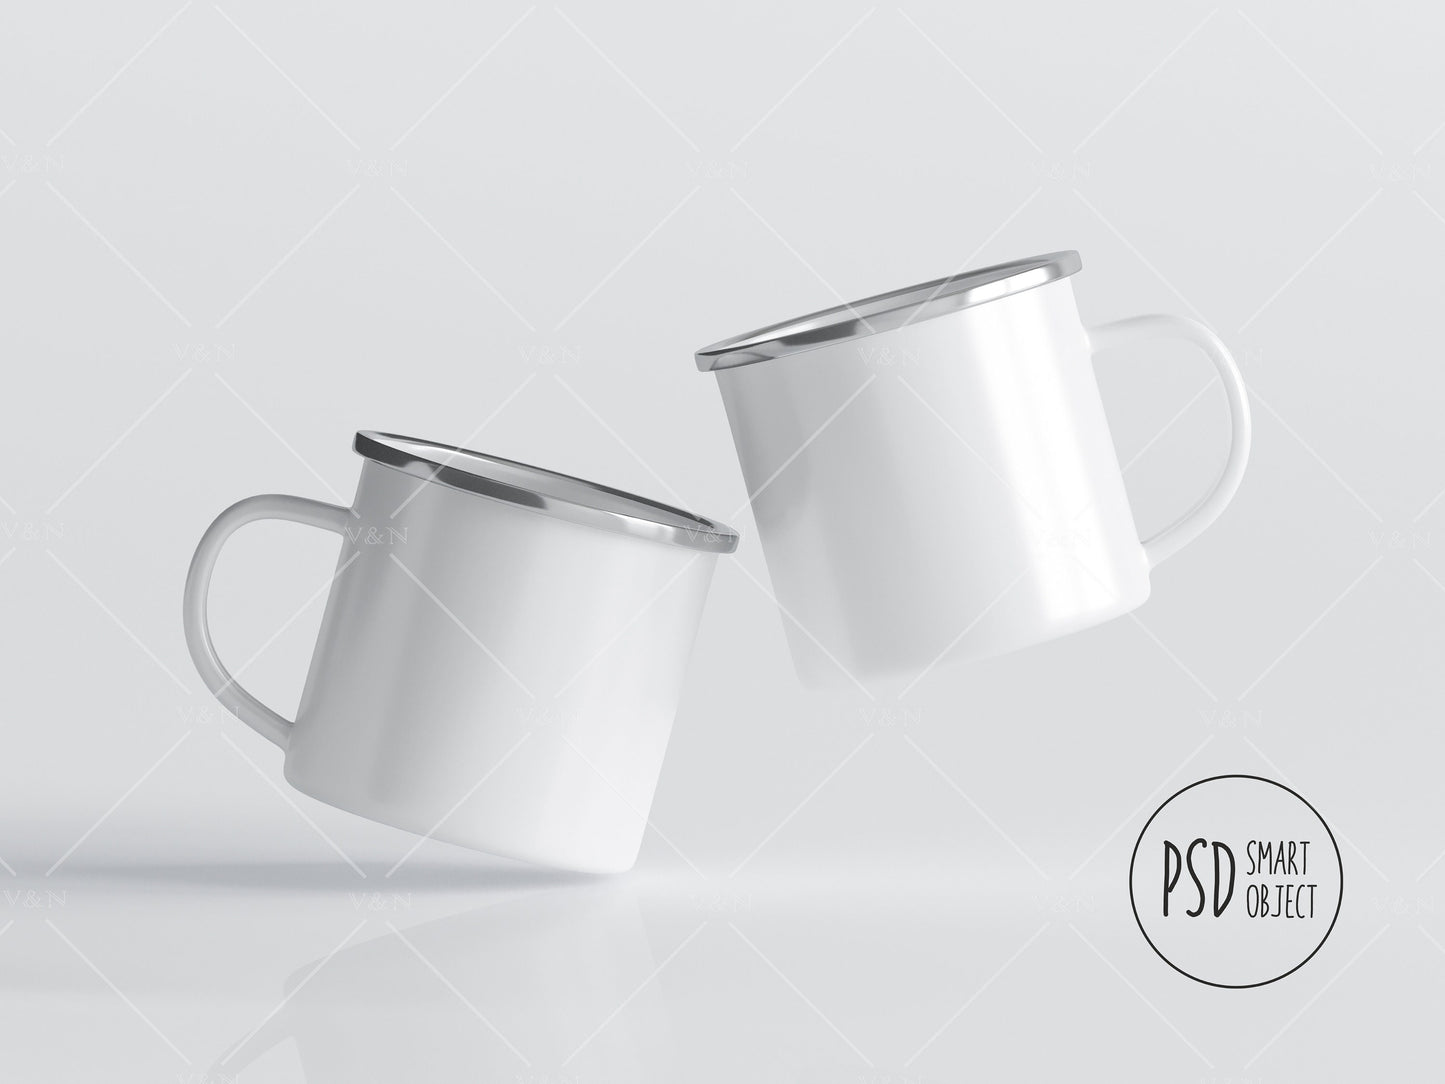 PSD JPG Two White Camp Cups Template Mockup, Enamel White Coffee Mug Mockup, Enamel Camping Cup Mockup, Photoshop Smart Object